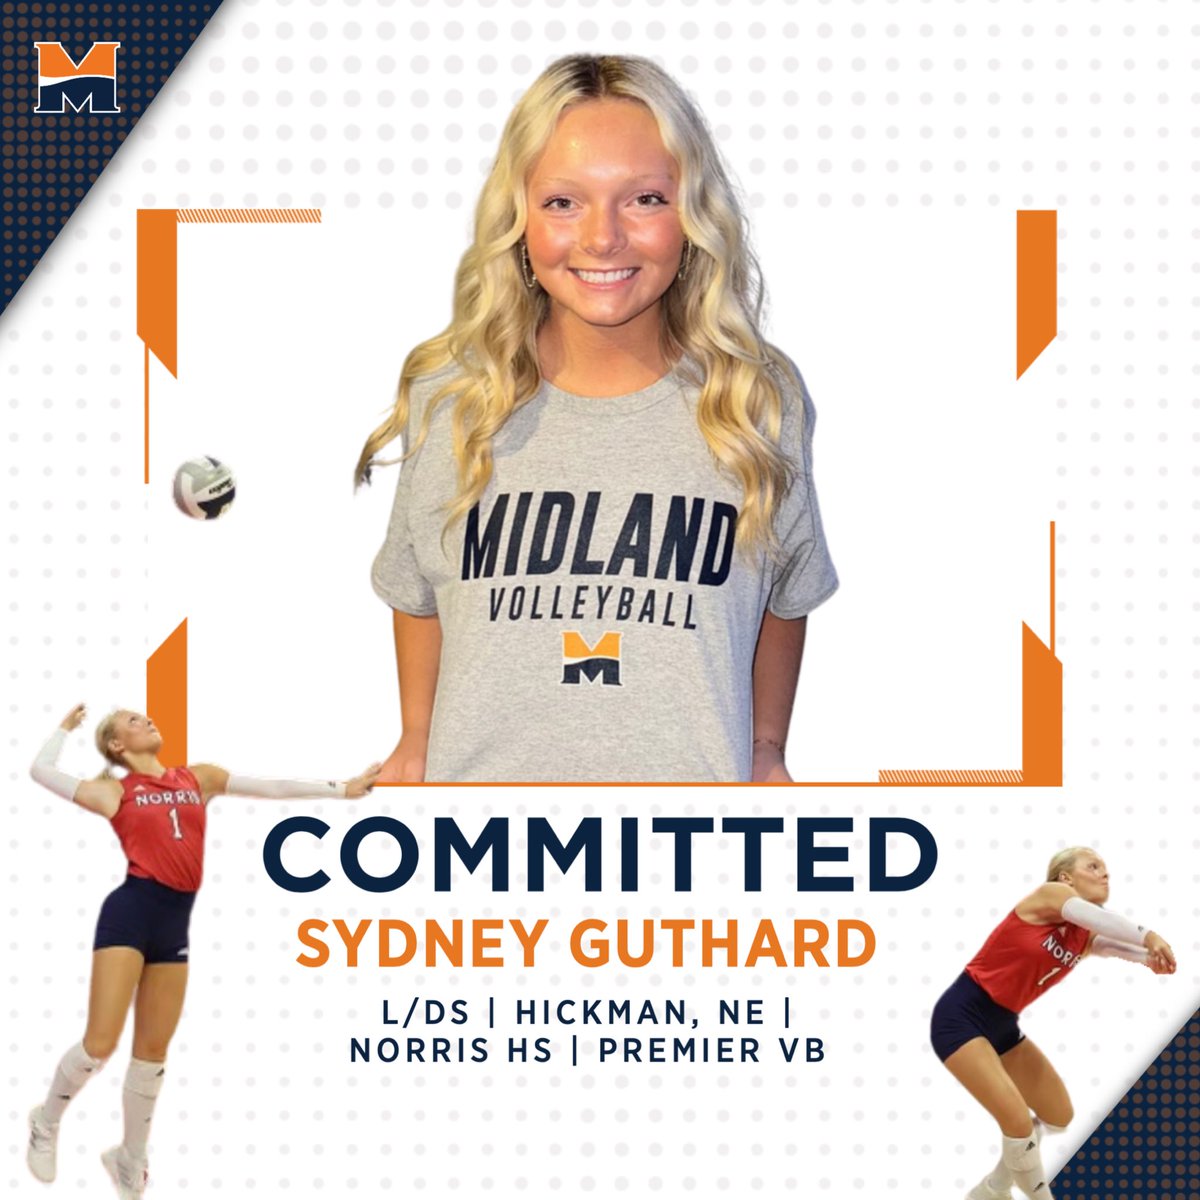 🚨 Commitment Alert 🚨 Congrats to Sydney Guthard on her commitment to Midland volleyball! Sydney joins our program this fall from Norris HS, where she was a 3x Class B state runner-up and contributed to an impressive 126-20 overall team record. Welcome to the family! 🧡💙